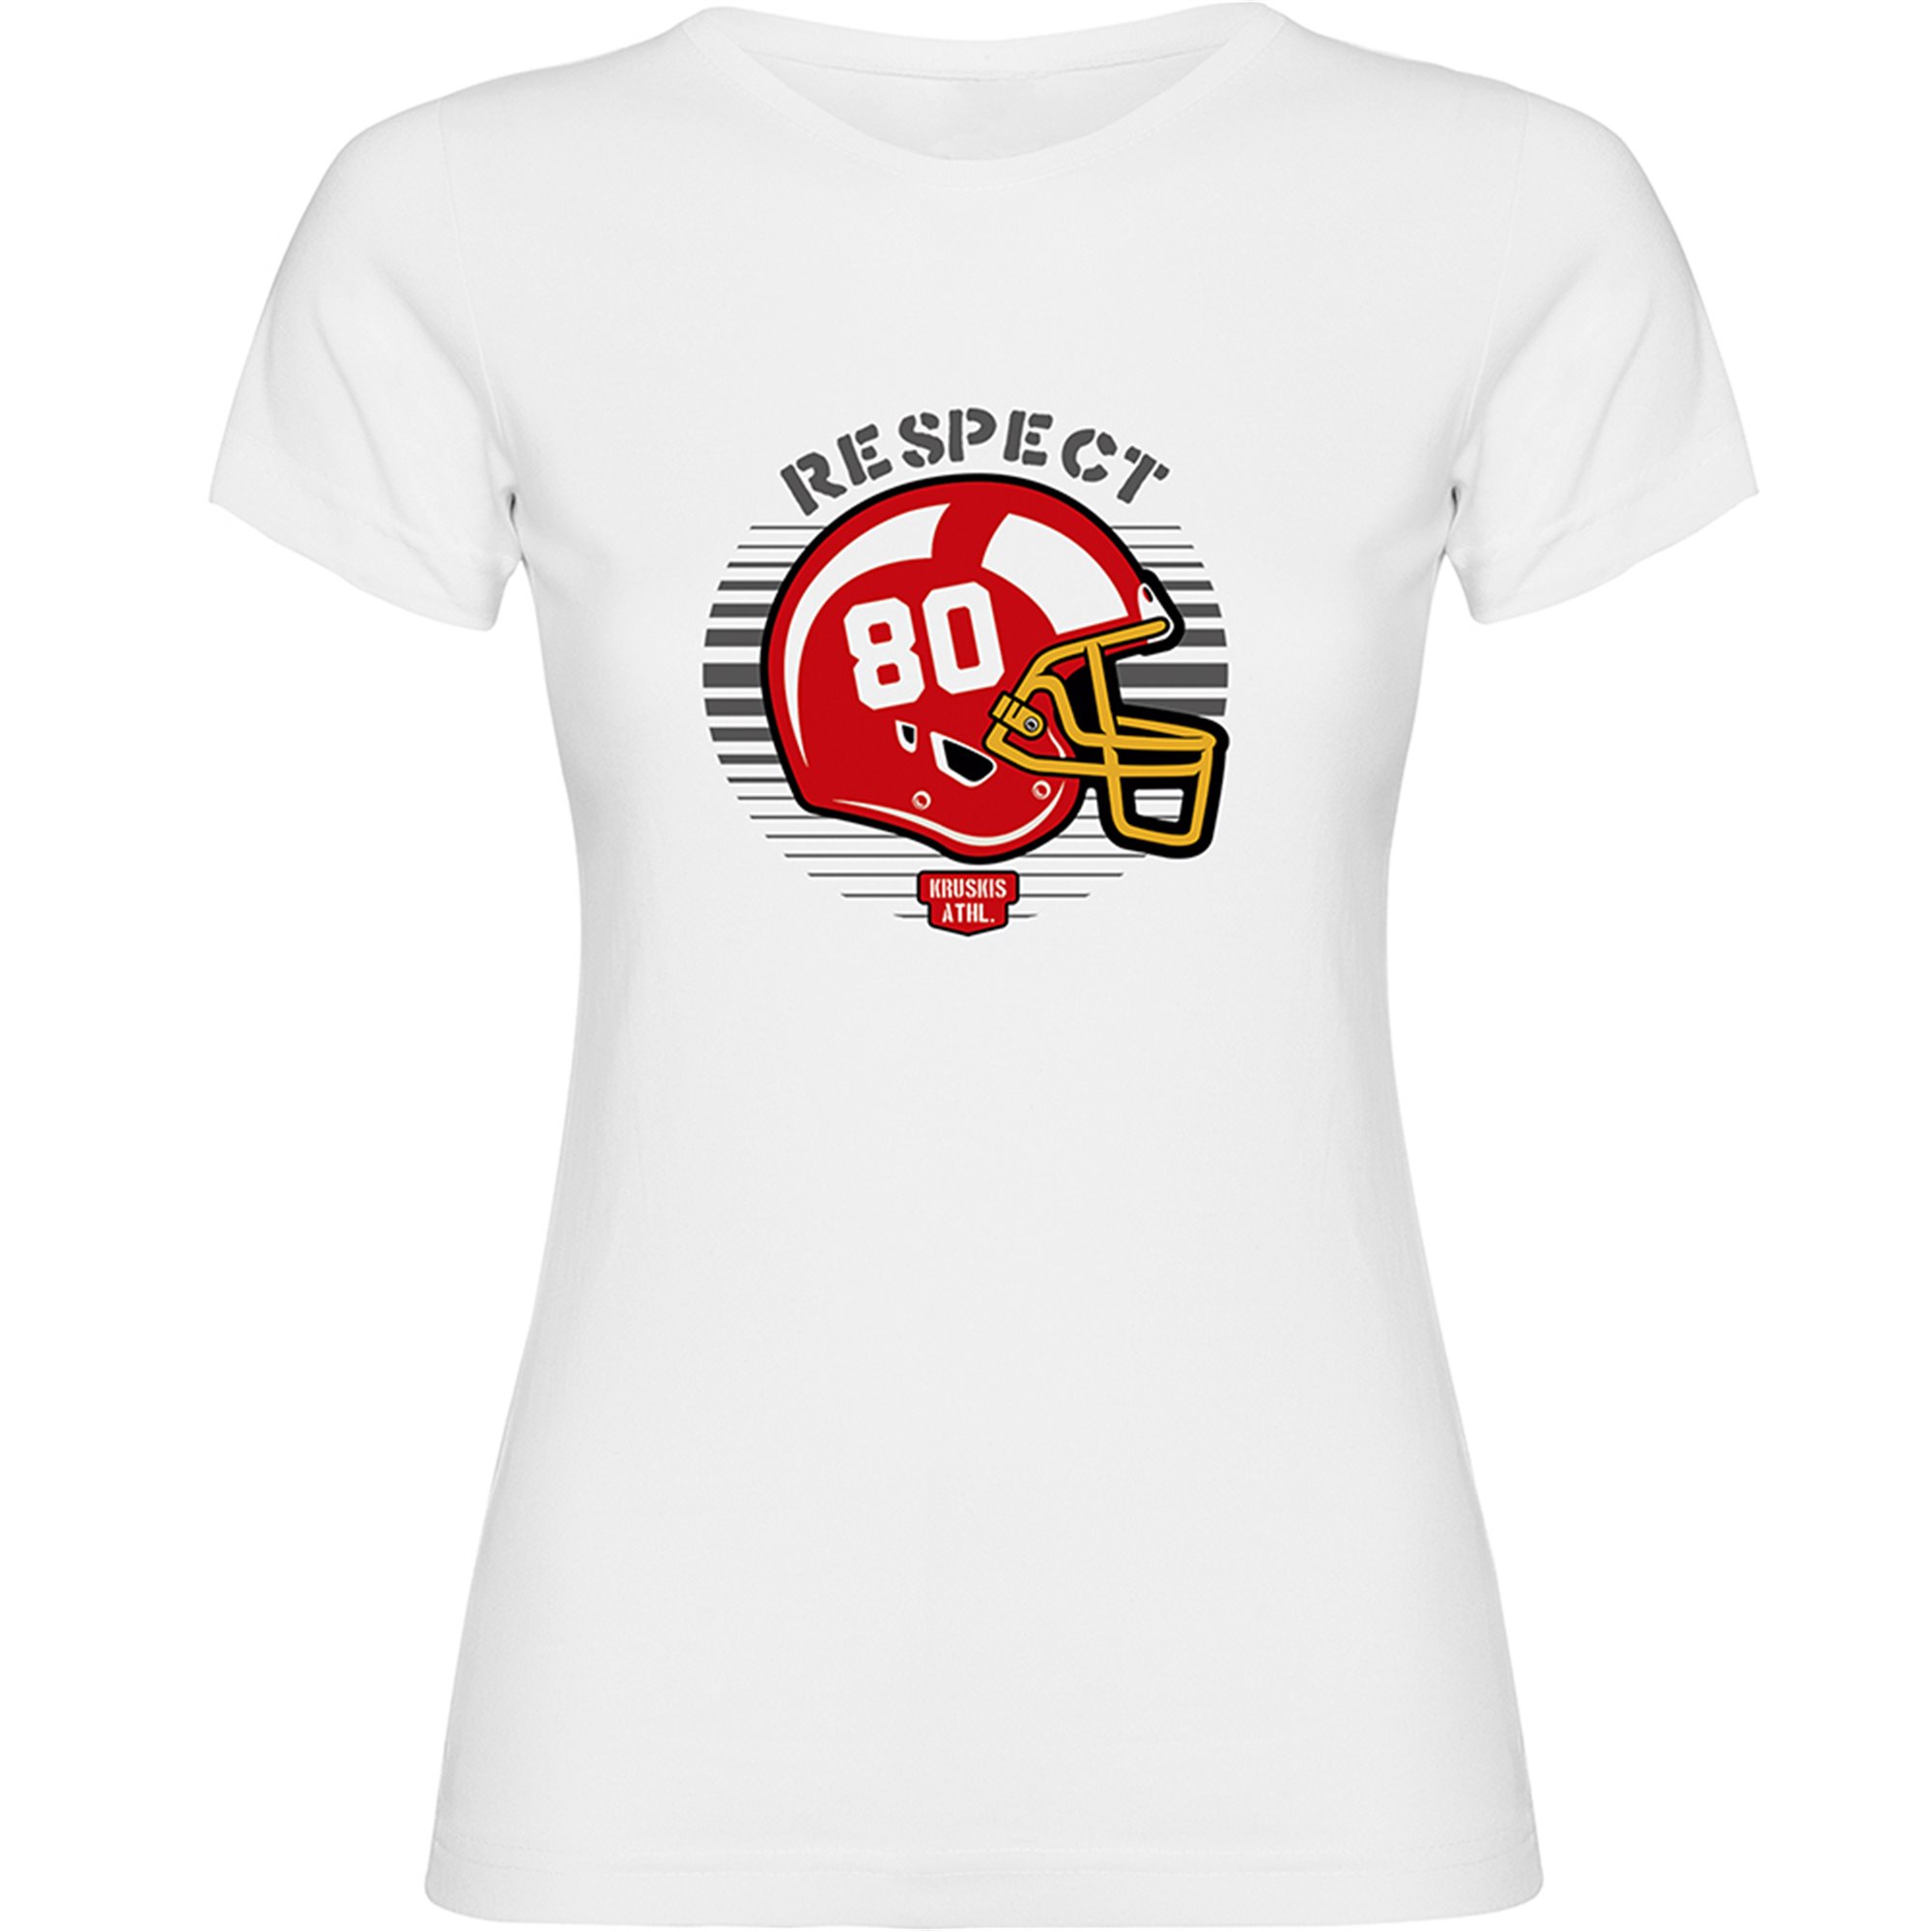 T shirt Rugby Respect Short Sleeves Woman